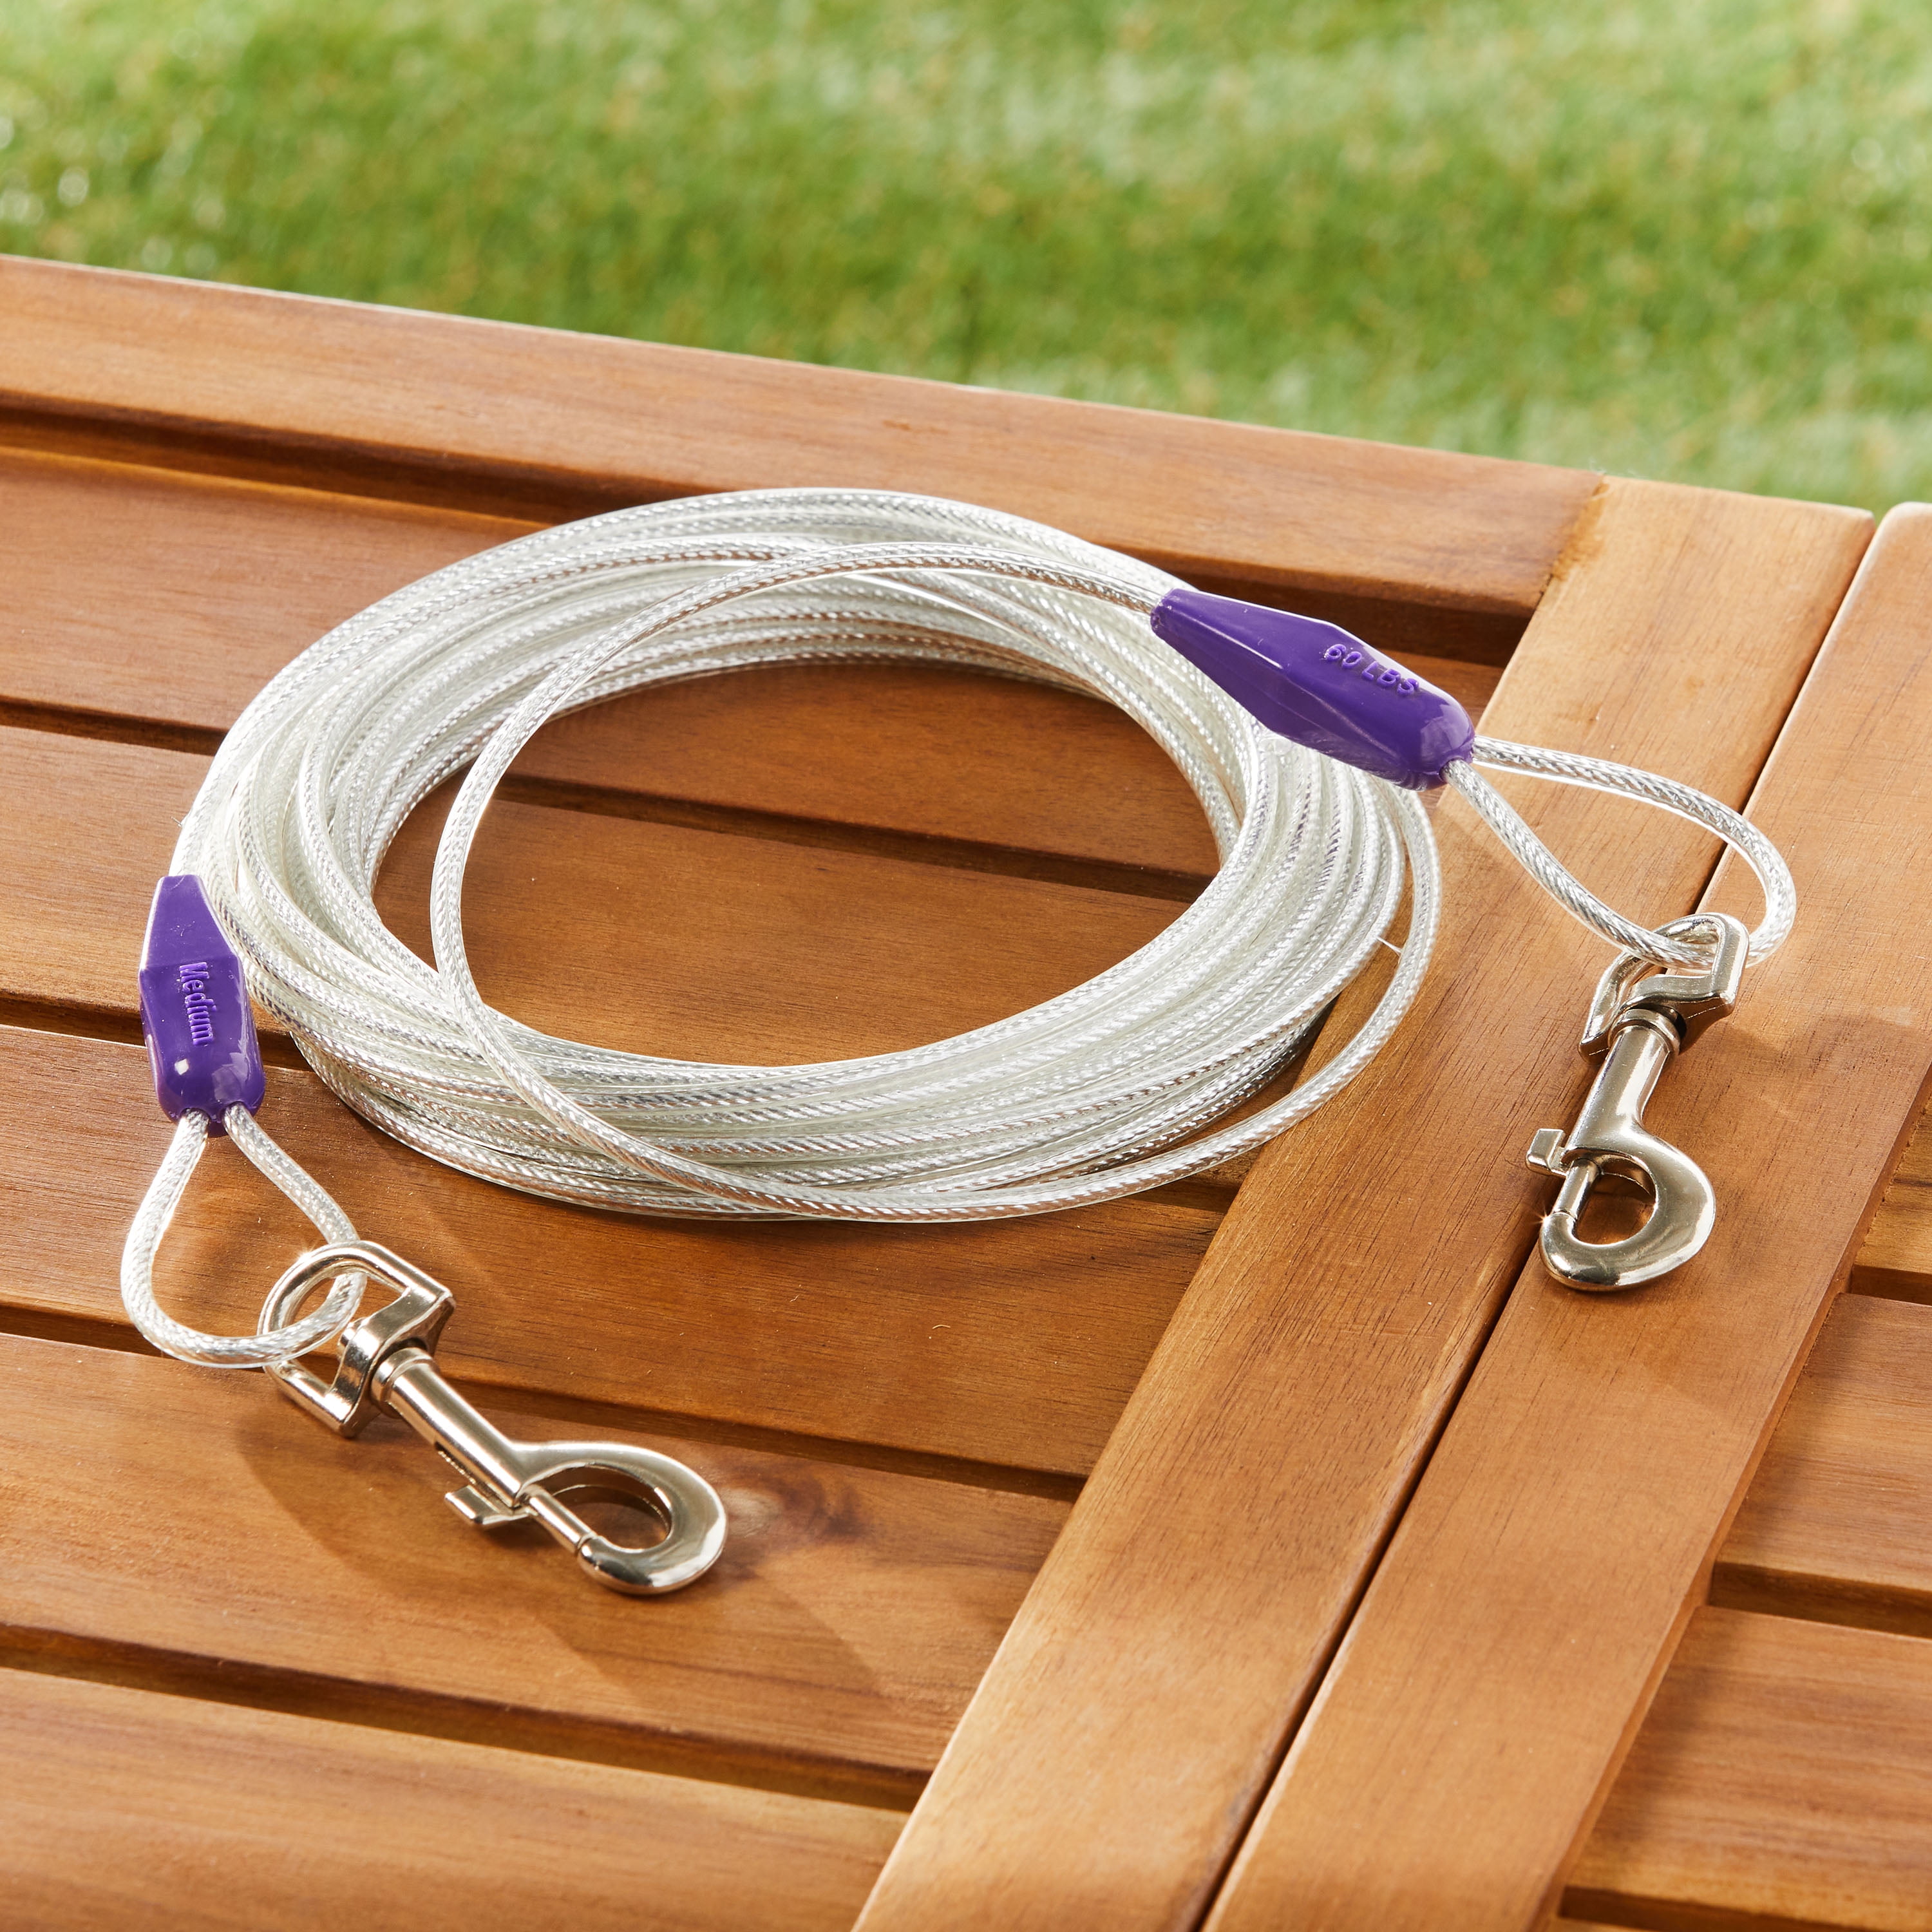 Buy TDIT Adjustable Nylon Dog Leash - Mountain Brown by That Dog In Tuxedo.